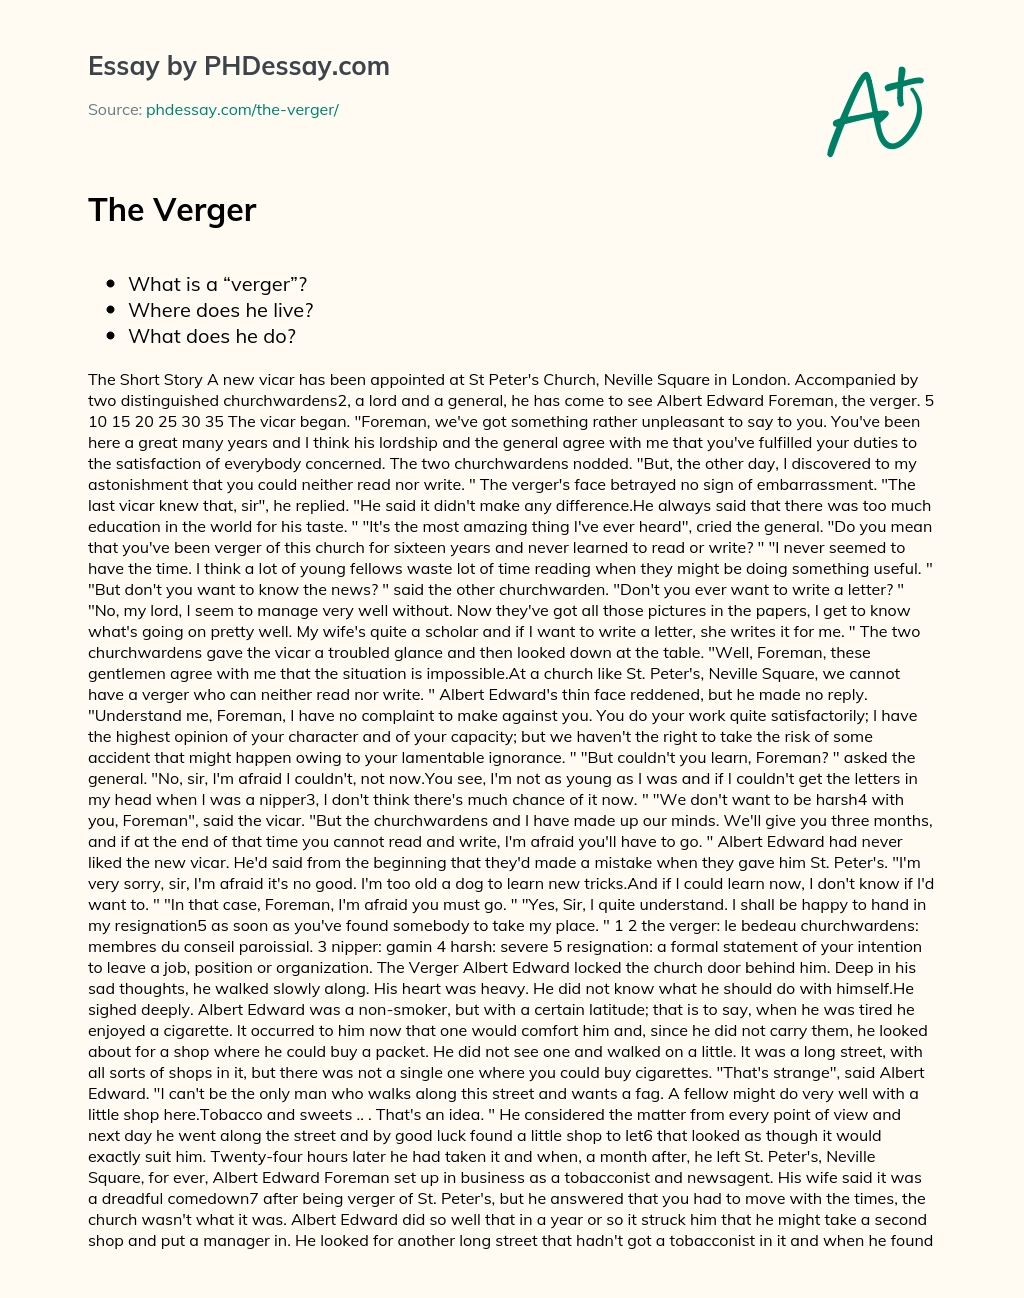 The Verger by Somerset Maugham